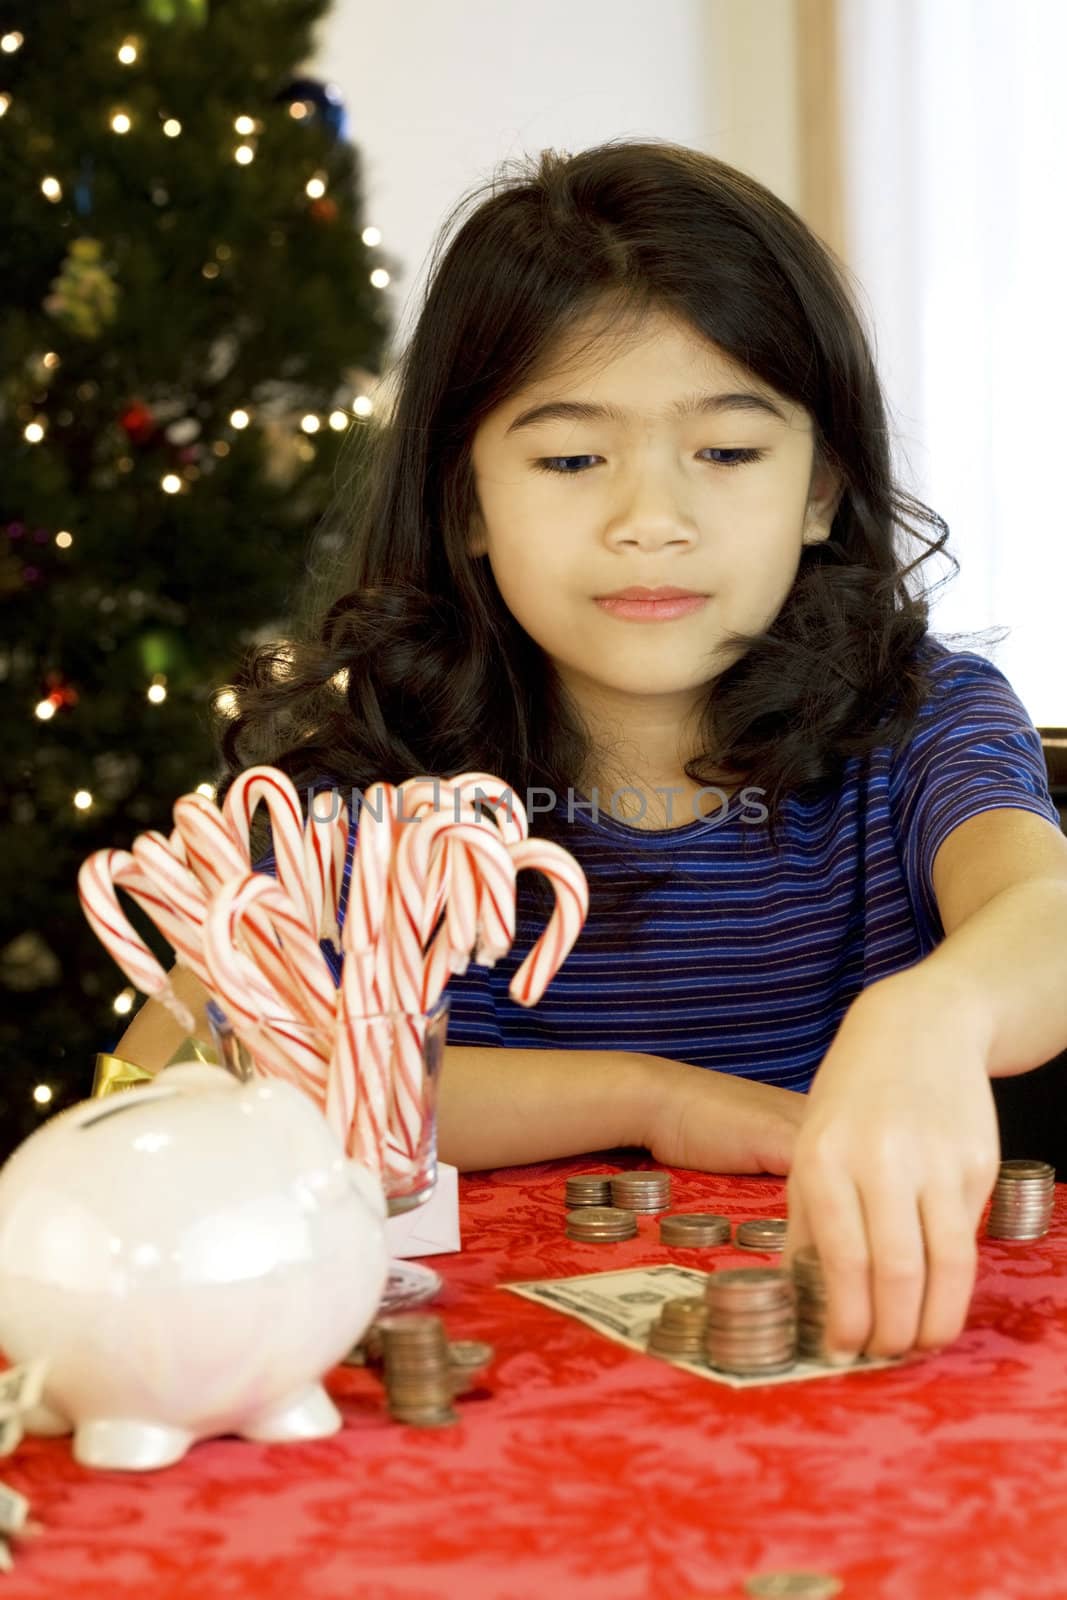 Little girl counting money at Christmas by jarenwicklund